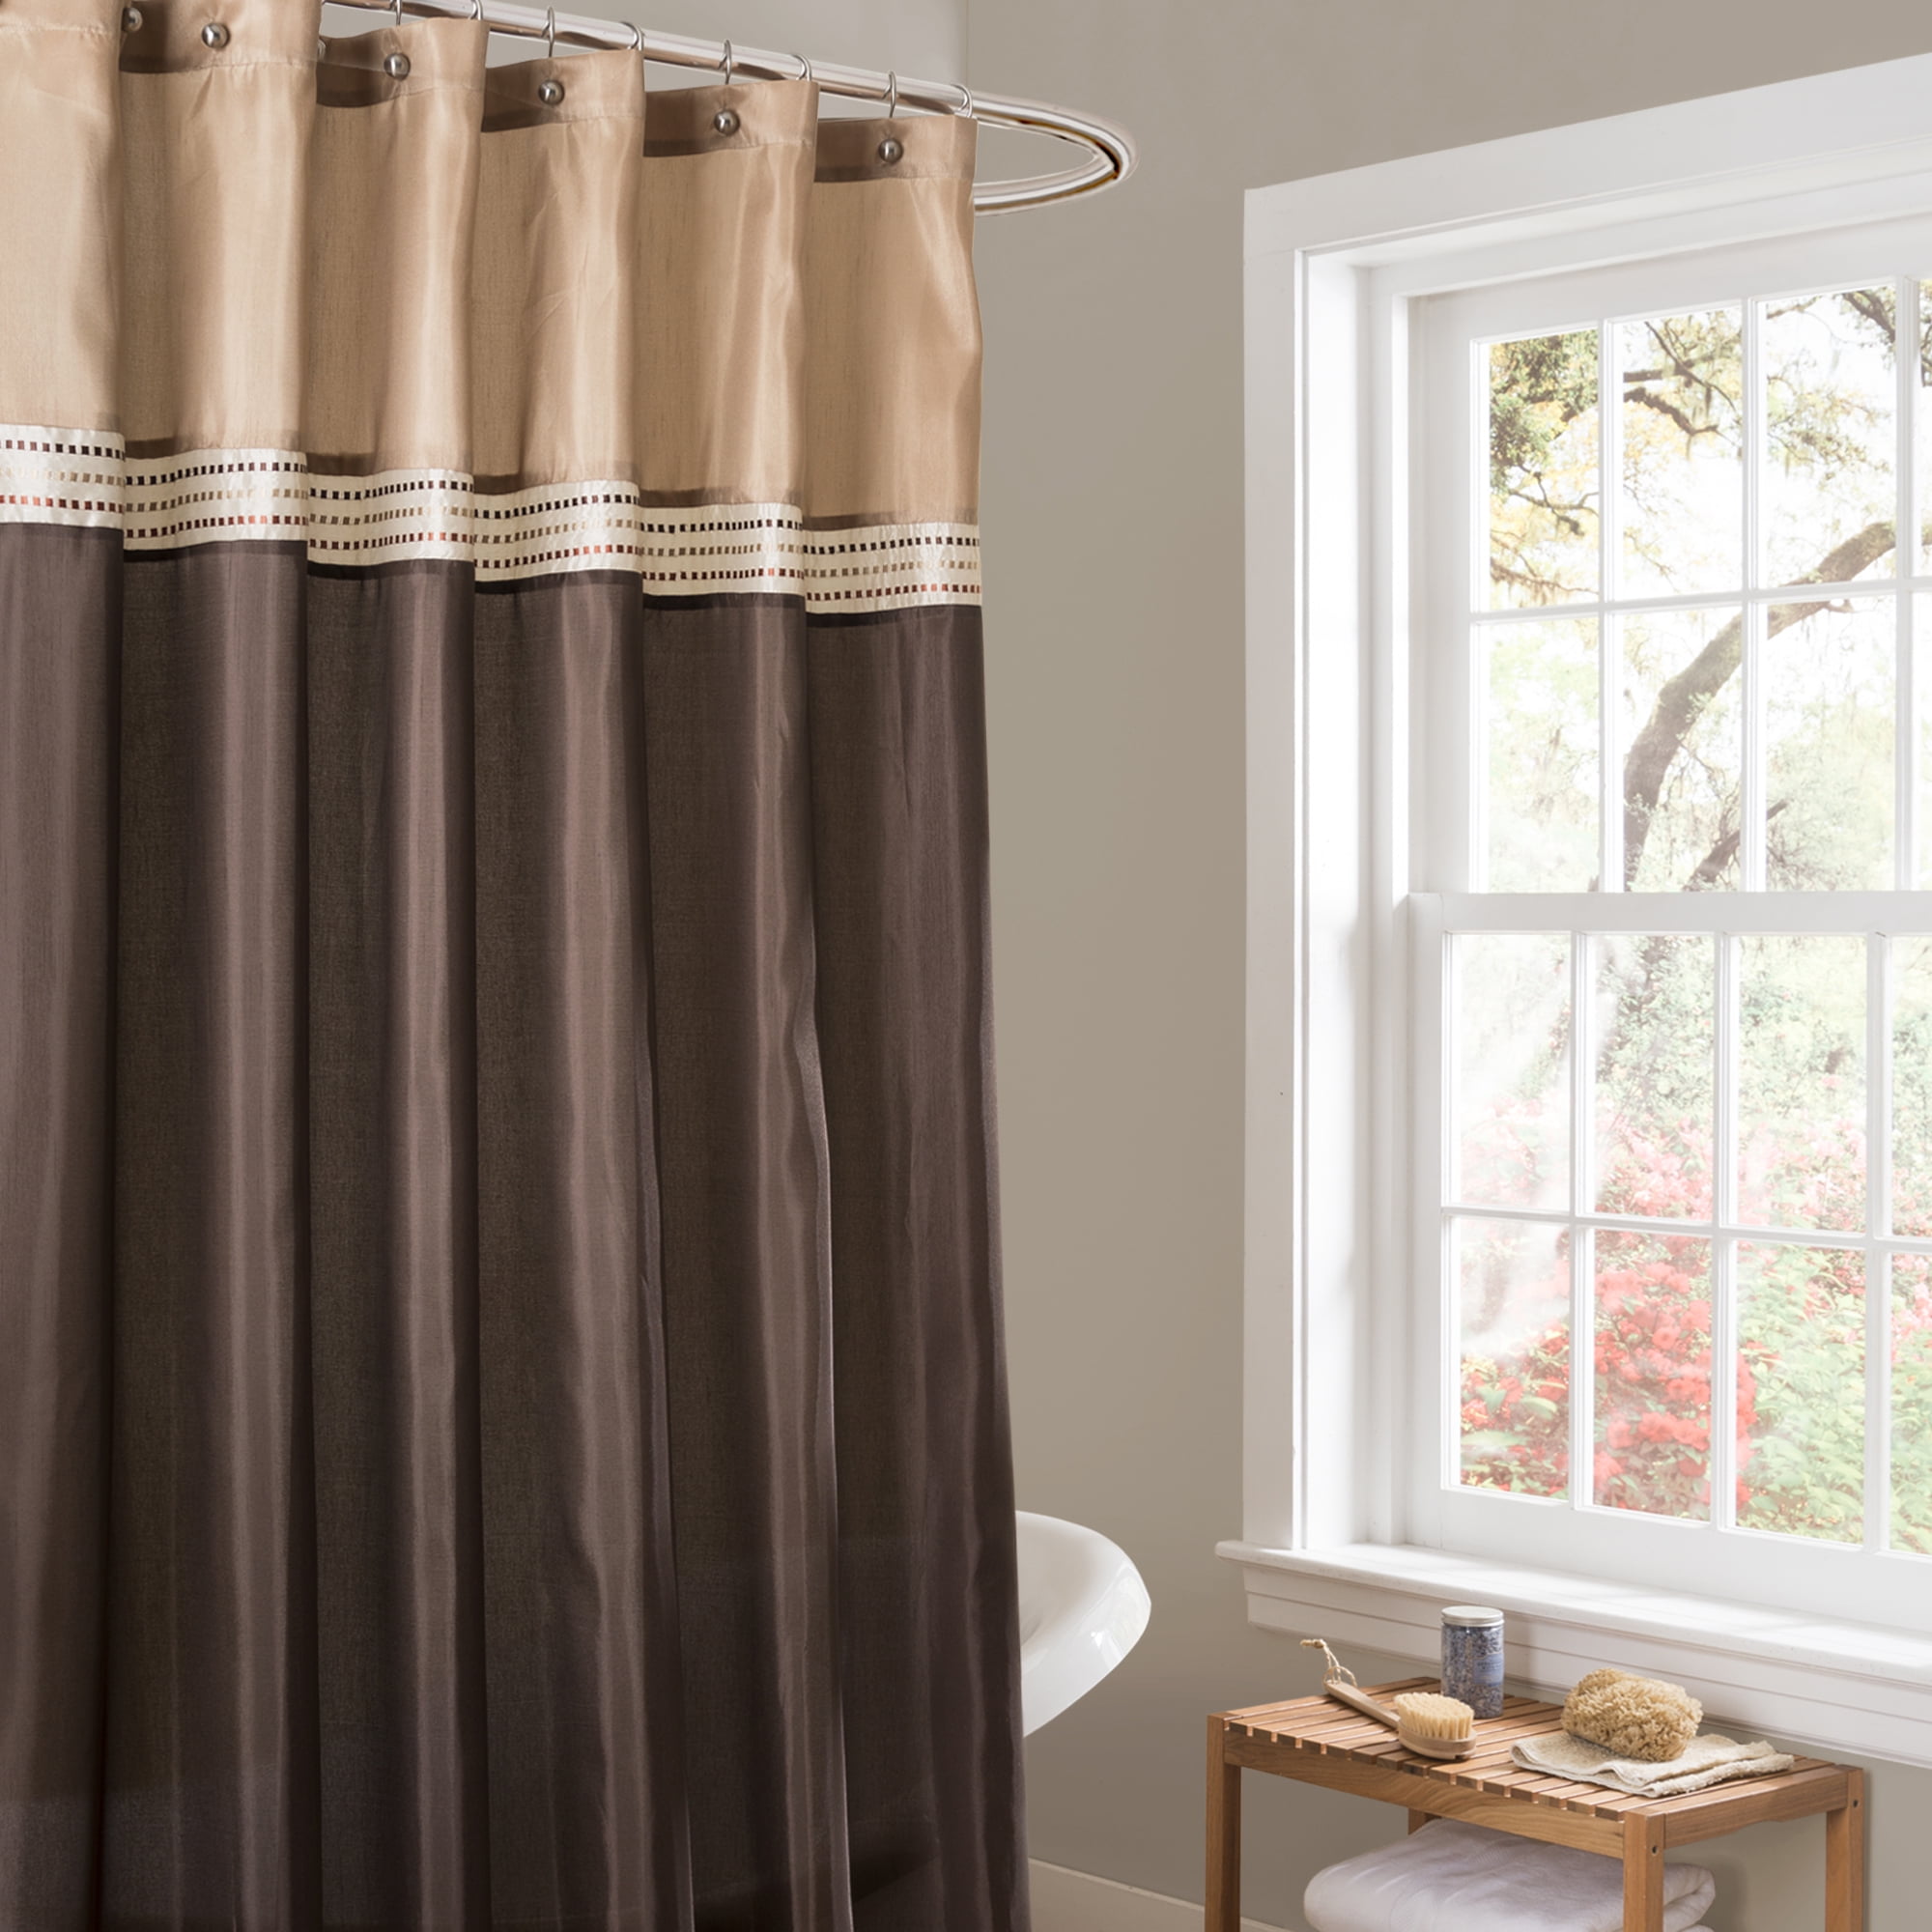 Embossed Fabric Shower Curtain/Liner 70"x72" Heartwood Hotel Collection